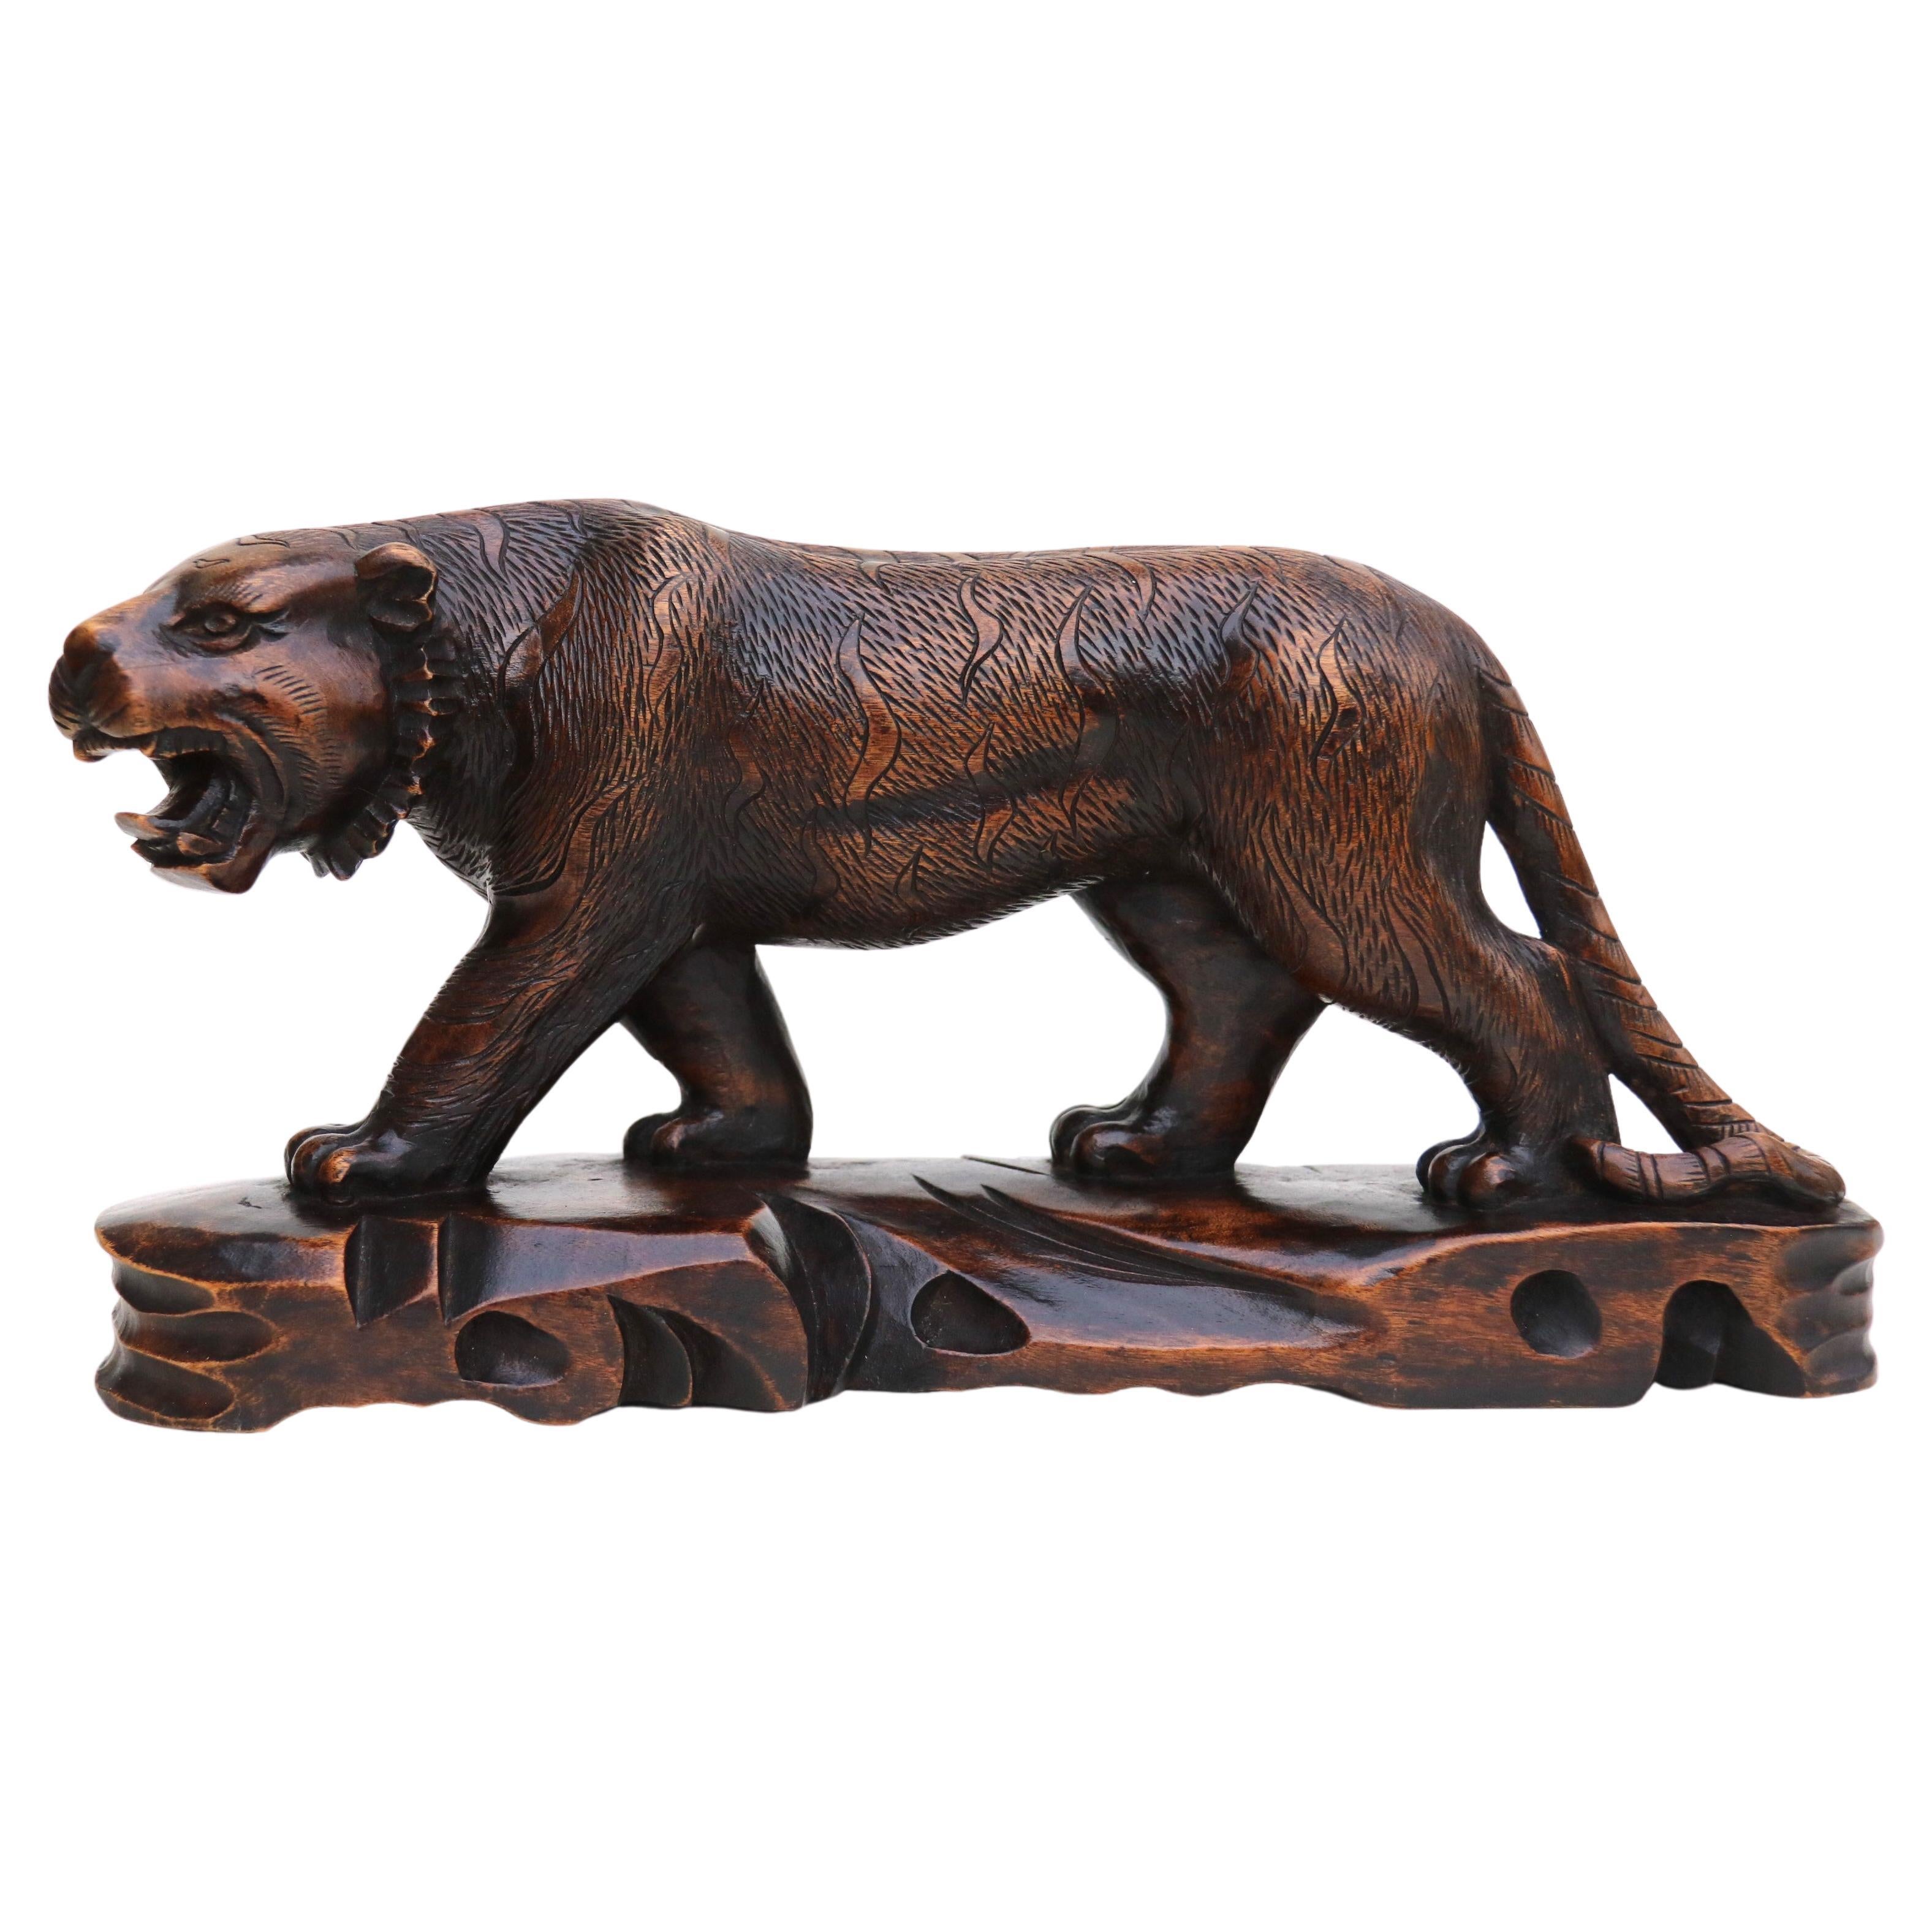 Antique Japanese Meiji period carved hardwood okimono of a prowling tiger C 1900